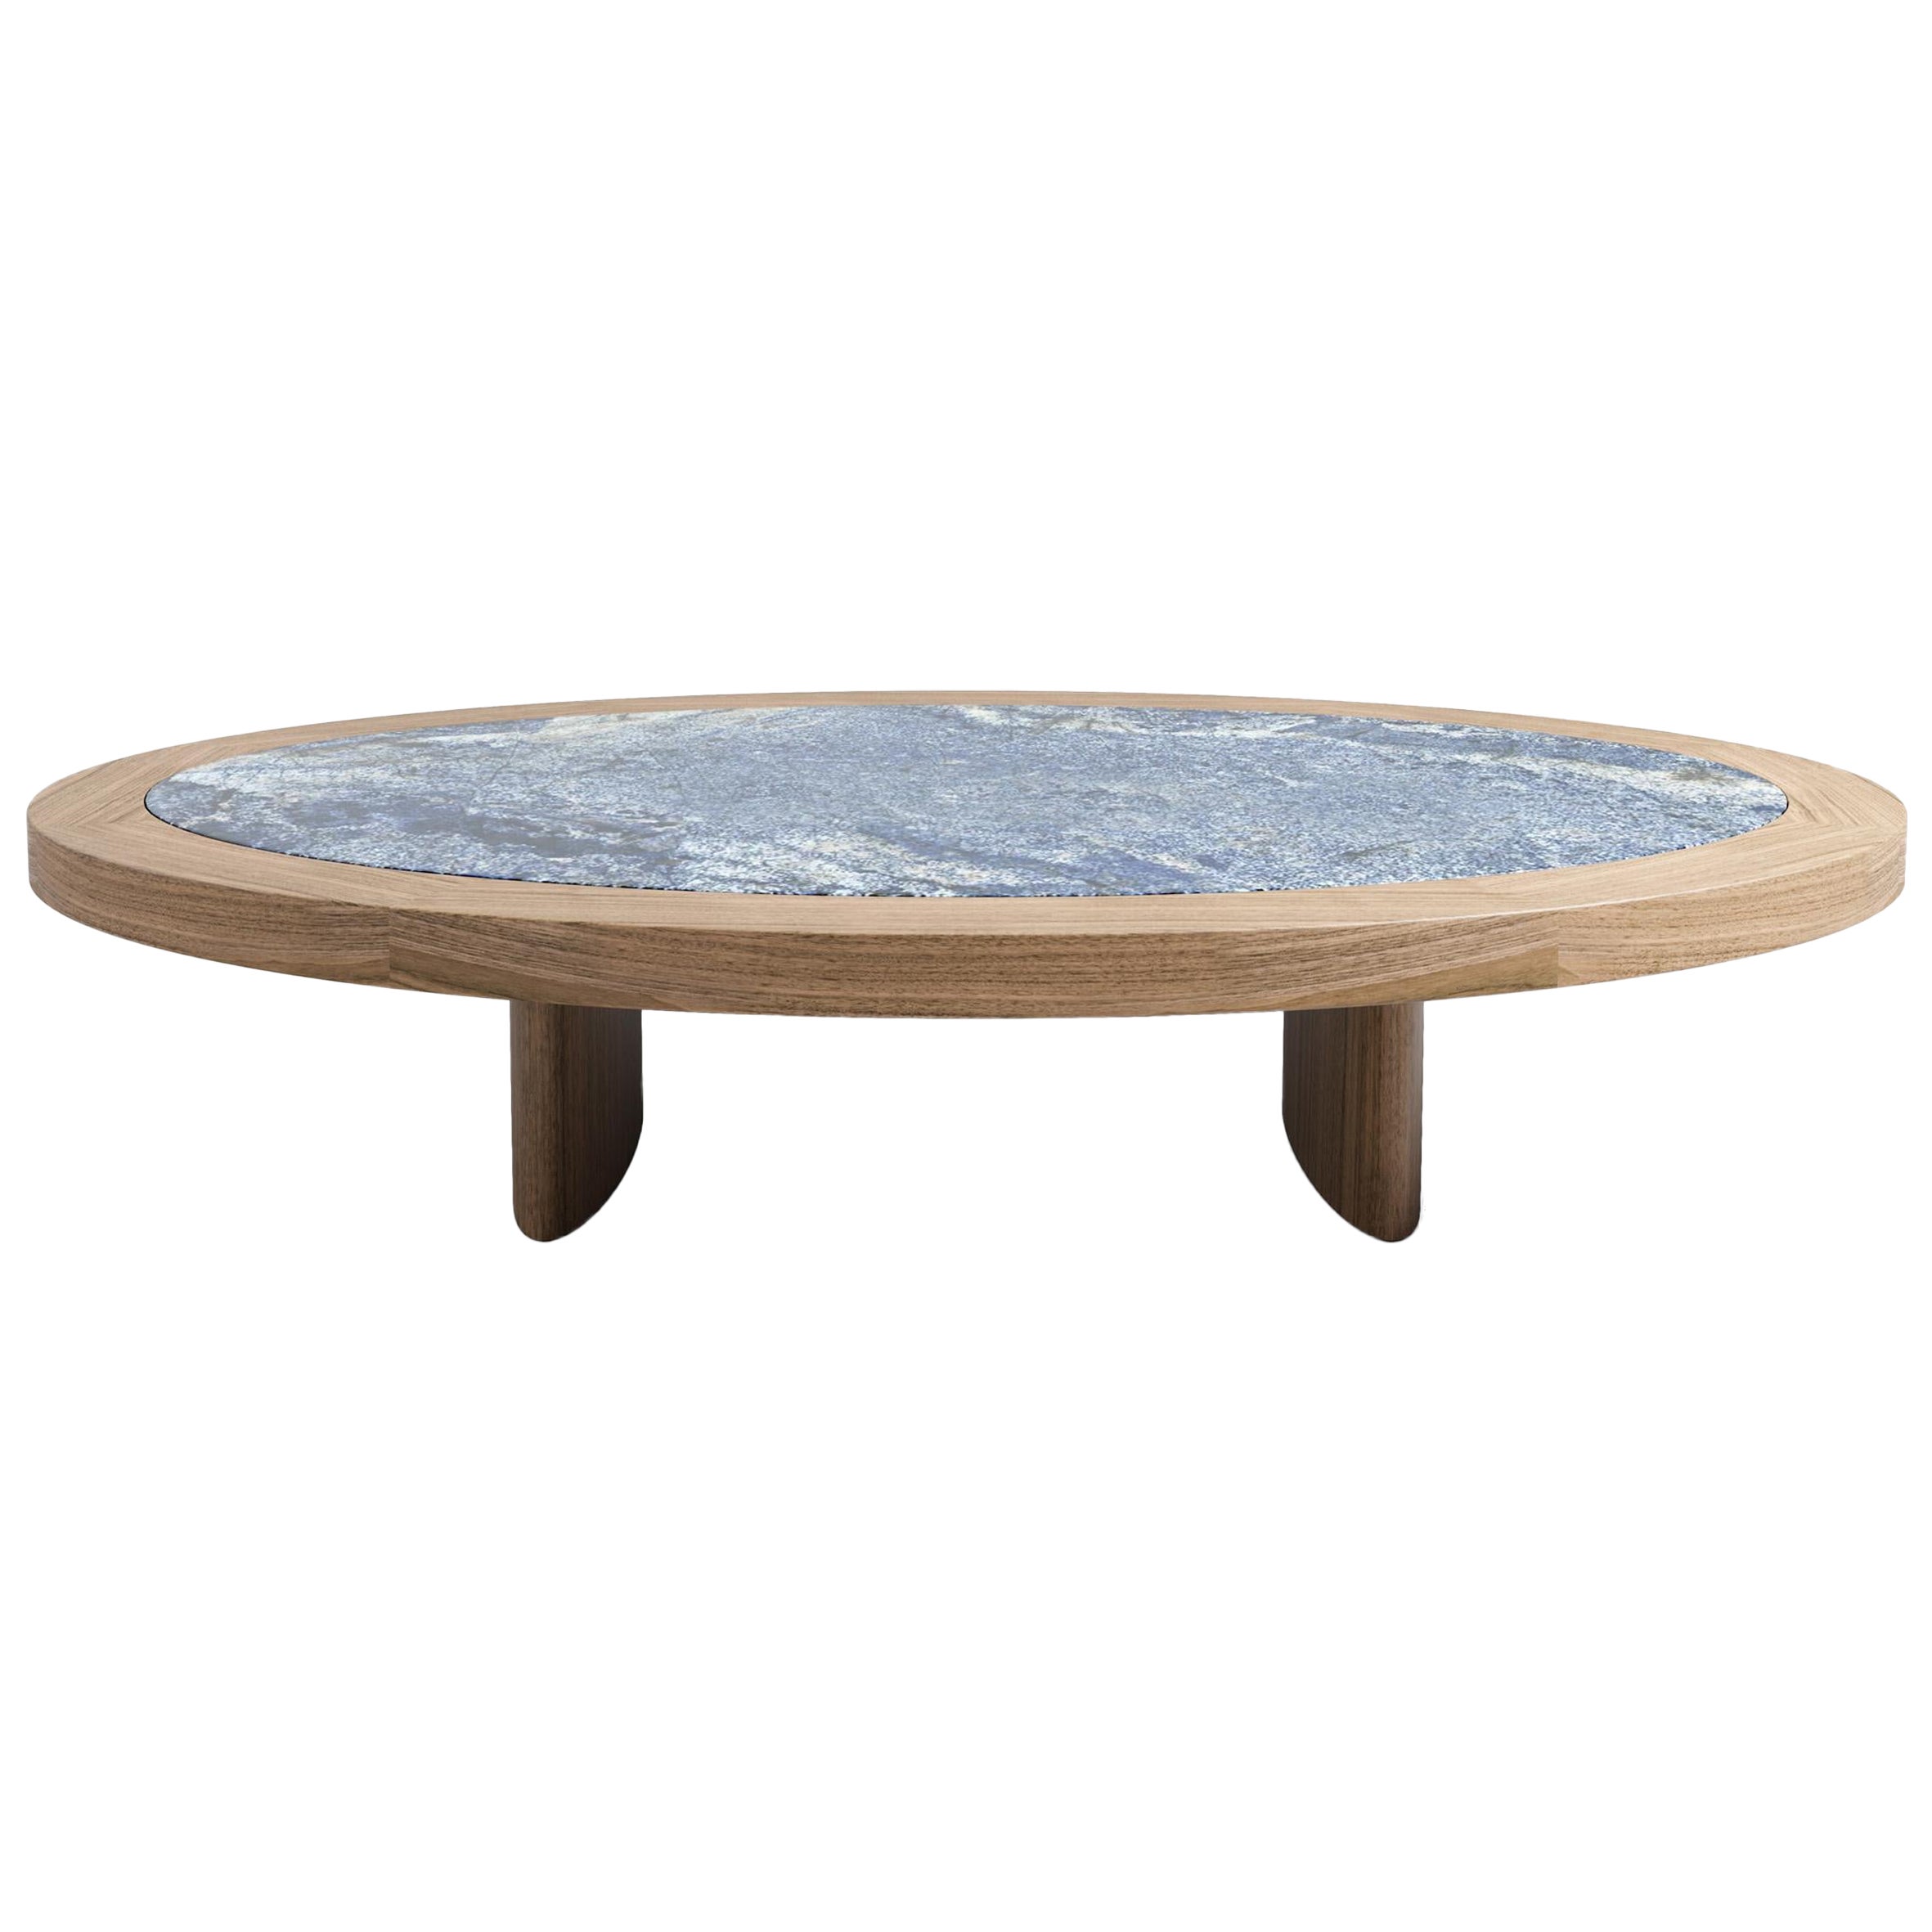 Limited Edition Table Monta in Wood and Blue Granite by Charlotte Perriand